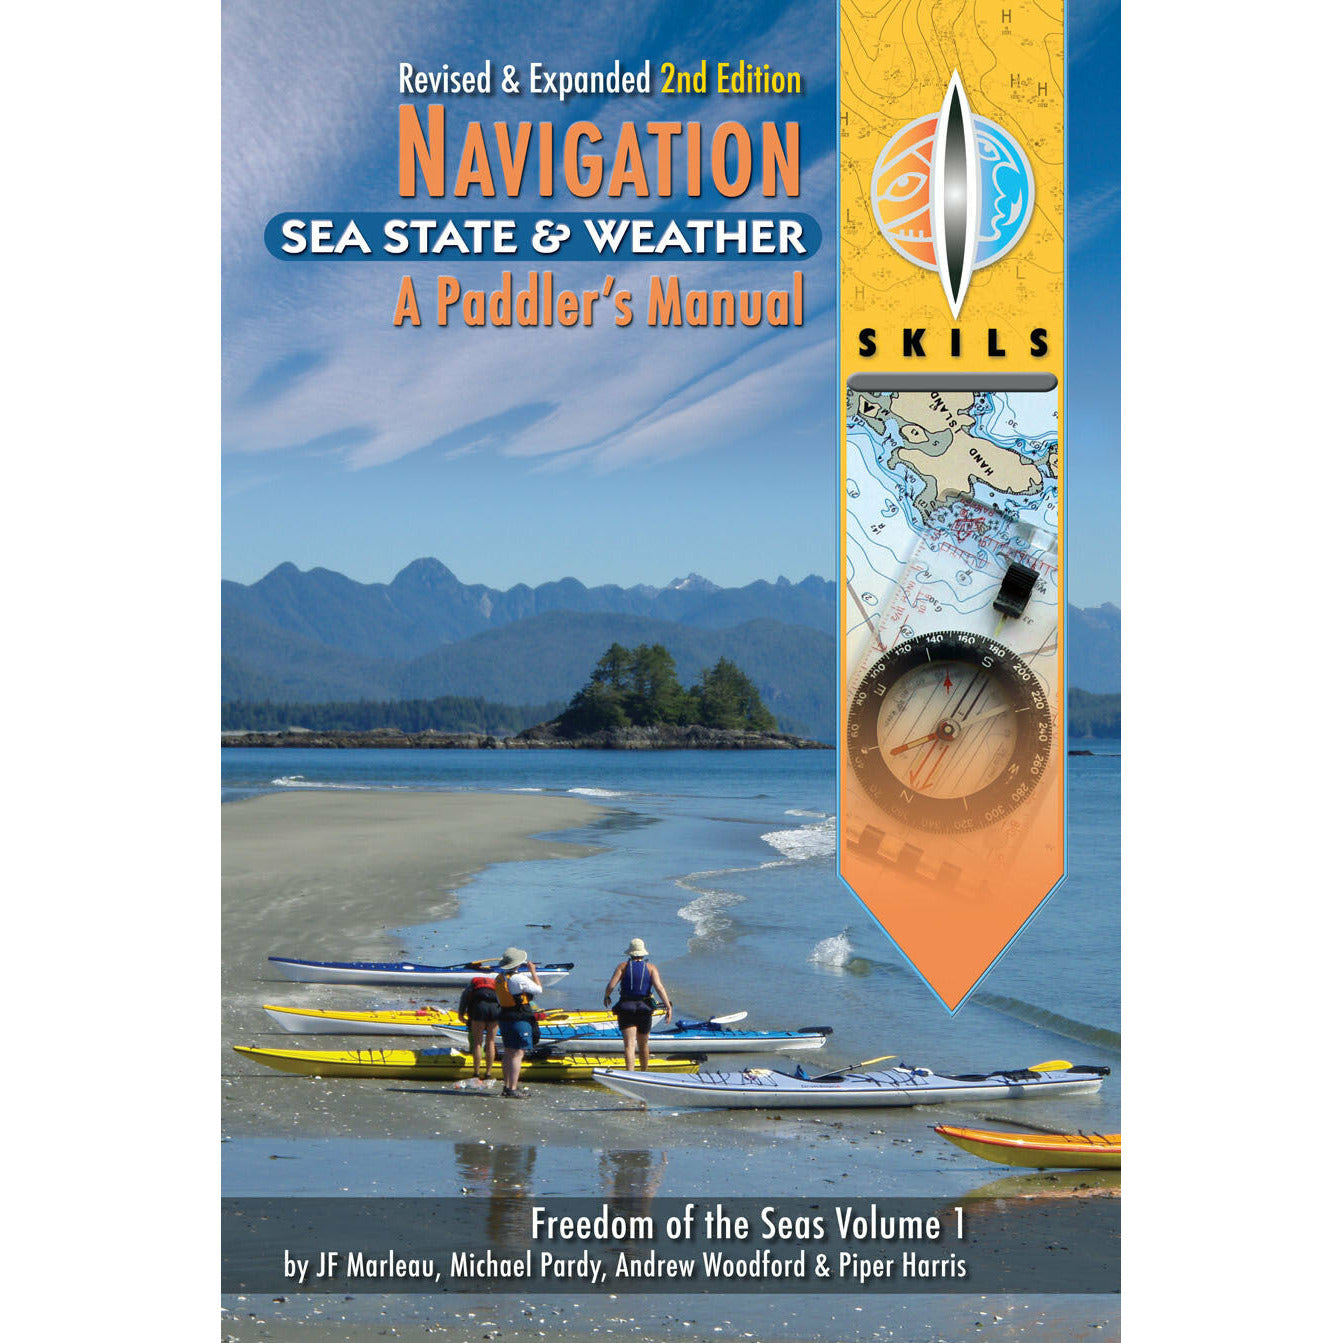 Skils - Navigation, Sea State, Weather -A Paddler's Manual. Freedom of the Seas Volume 1. 2020. Second Edition (Paperback).